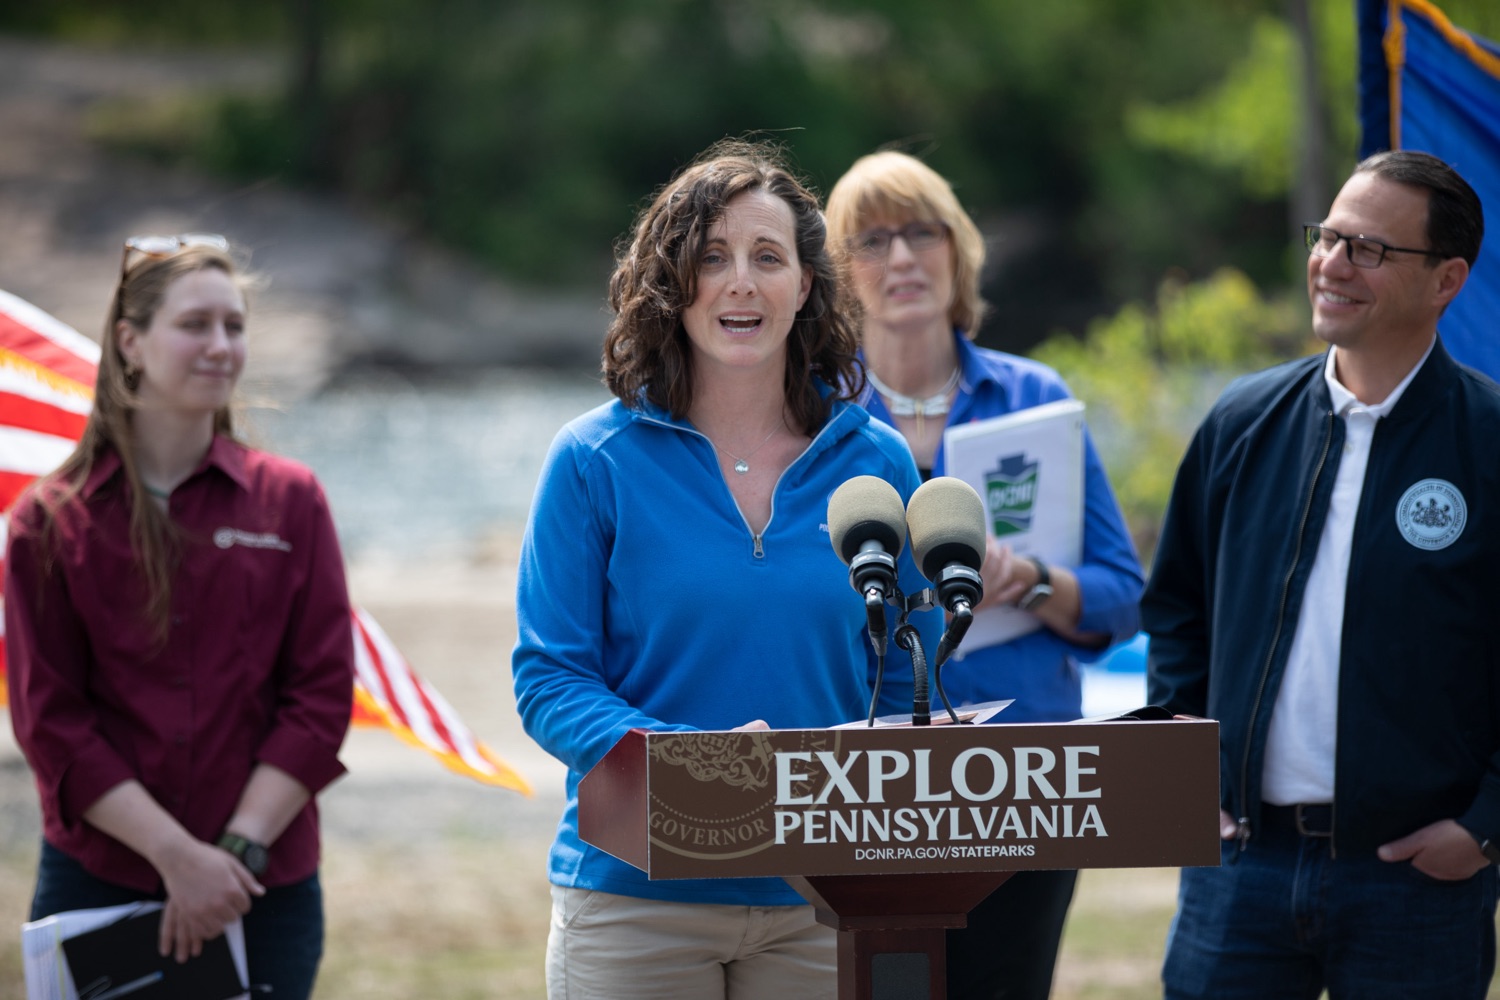 Sierra Fogal, President of Pocono Whitewater, joined Governor Josh Shapiro in visiting Lehigh Gorge State Park in Luzerne County to open a new park access point and highlight his budget's proposed investments in state parks, forests, and trails to make them safe and accessible for every Pennsylvanian.. .In March, the Governor unveiled his commonsense budget proposal filled with solutions to the most pressing issues Pennsylvanians face  including investments to make Pennsylvania communities safer and healthier, grow the economy, safeguard the environment, and support local businesses. . ."The Lehigh River provides accessible outdoor recreation for the entire tri-state area. It is a tourist destination that draws hundreds of thousands of tourists a year and provides an outdoor outlet to a diverse audience. This is only possible because of the work of the Department of Conservation and Natural Resources to protect and improve the state park so that it continues to thrive with increasing numbers of visitors," said Pocono Whitewater Operations Manager Sierra Fogal. "With the current support from the newly created Office of Outdoor Recreation, Director Hollis, Secretary Dunn, and Governor Shapiro, I'm confident that Pennsylvania will stay committed to these outdoor resources for our own personal enjoyment, as well as the tourism and outdoor recreation industry that is a main economic driver in this region." .<br><a href="https://filesource.amperwave.net/commonwealthofpa/photo/23155_GOV_LehighGorge_ERD_026.jpg" target="_blank">⇣ Download Photo</a>